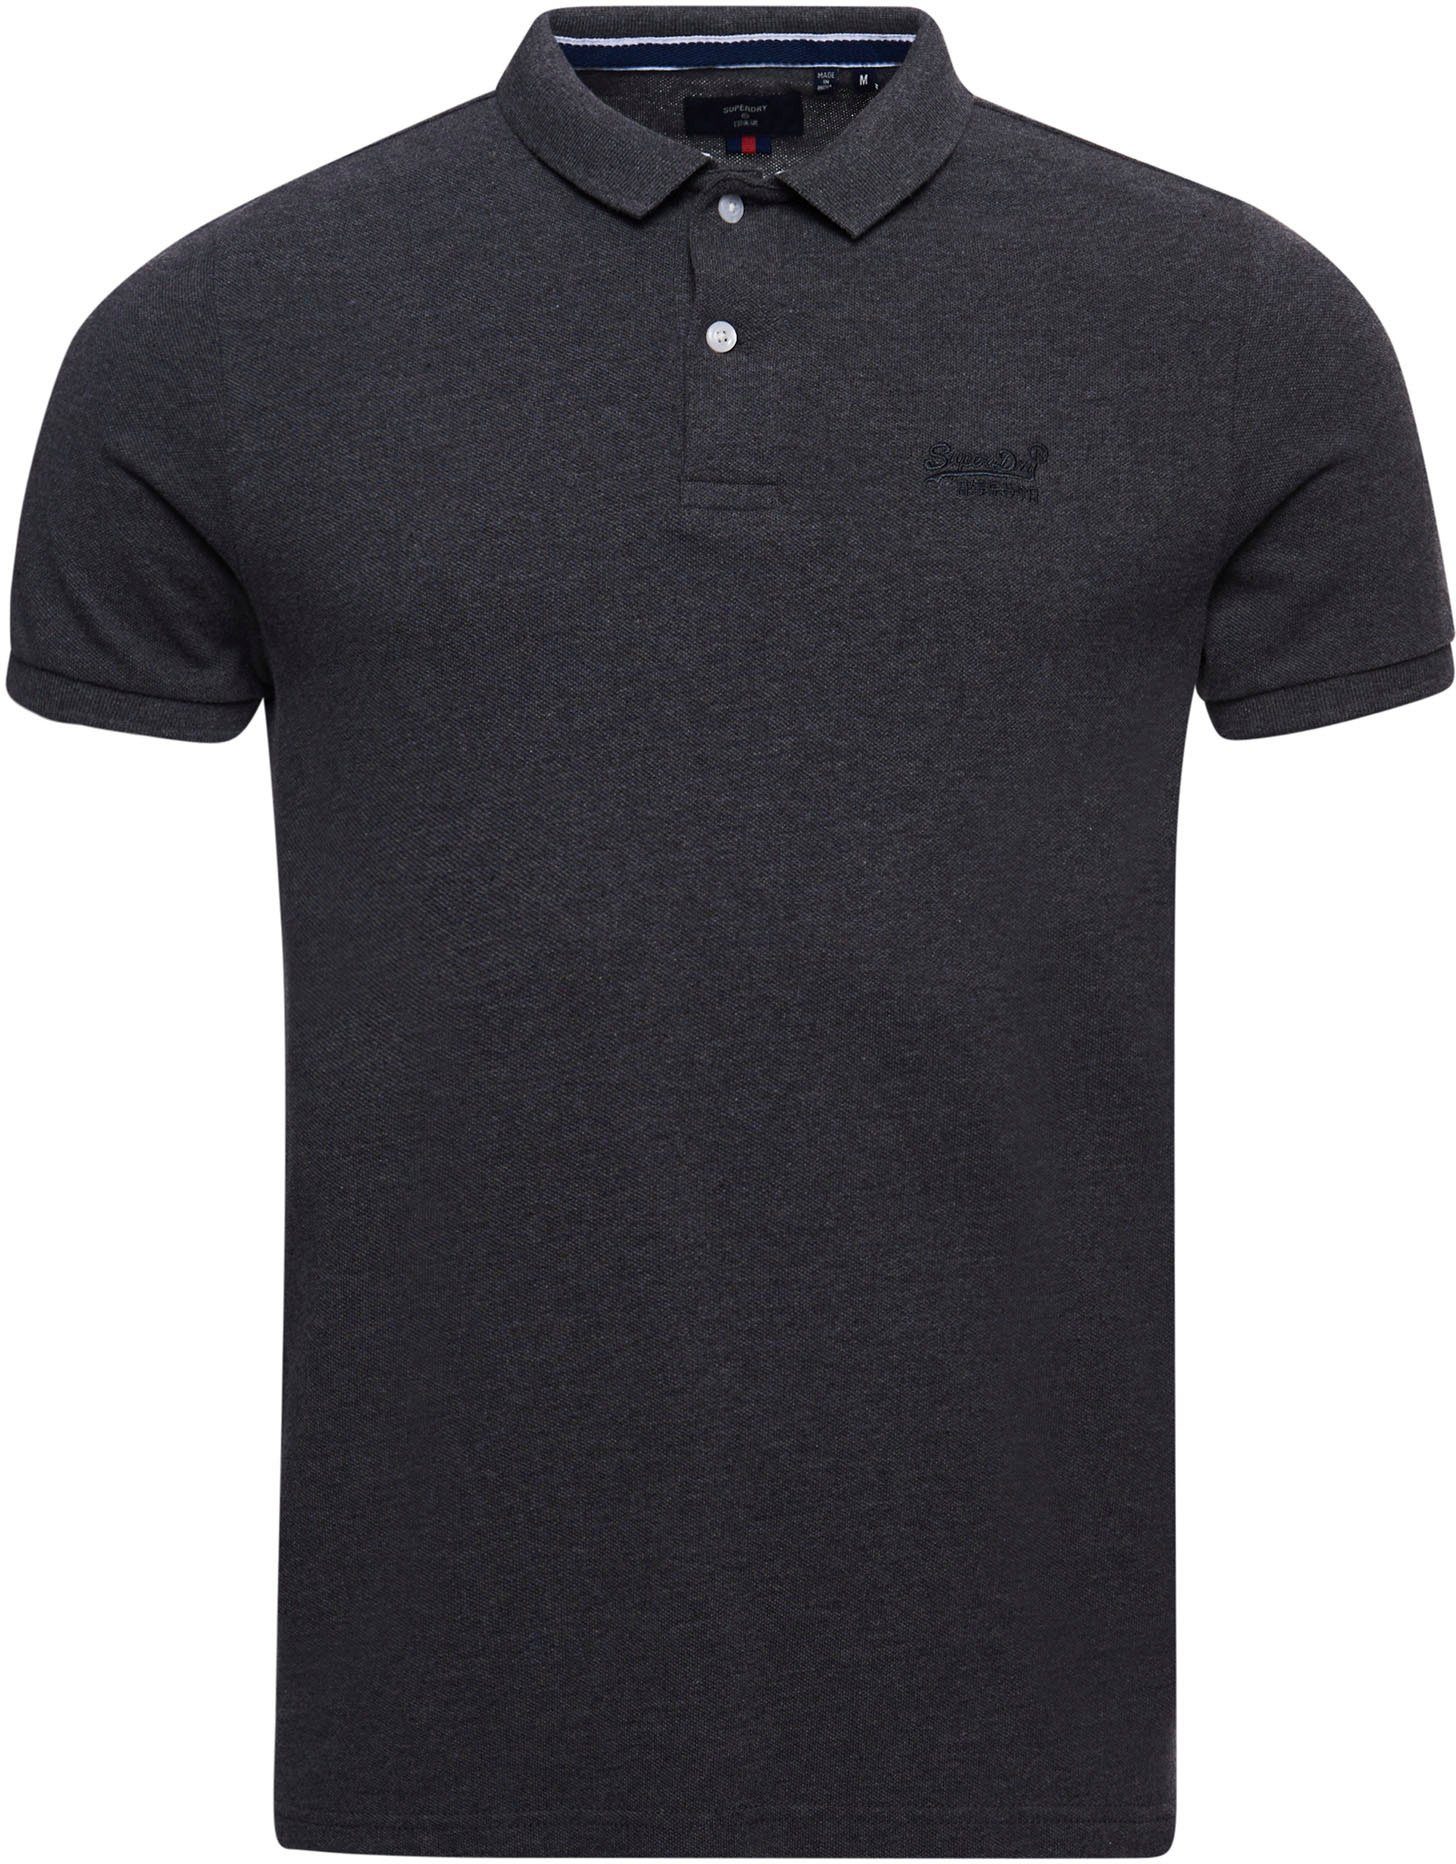 POLO charcoal Poloshirt rich PIQUE marl Superdry CLASSIC